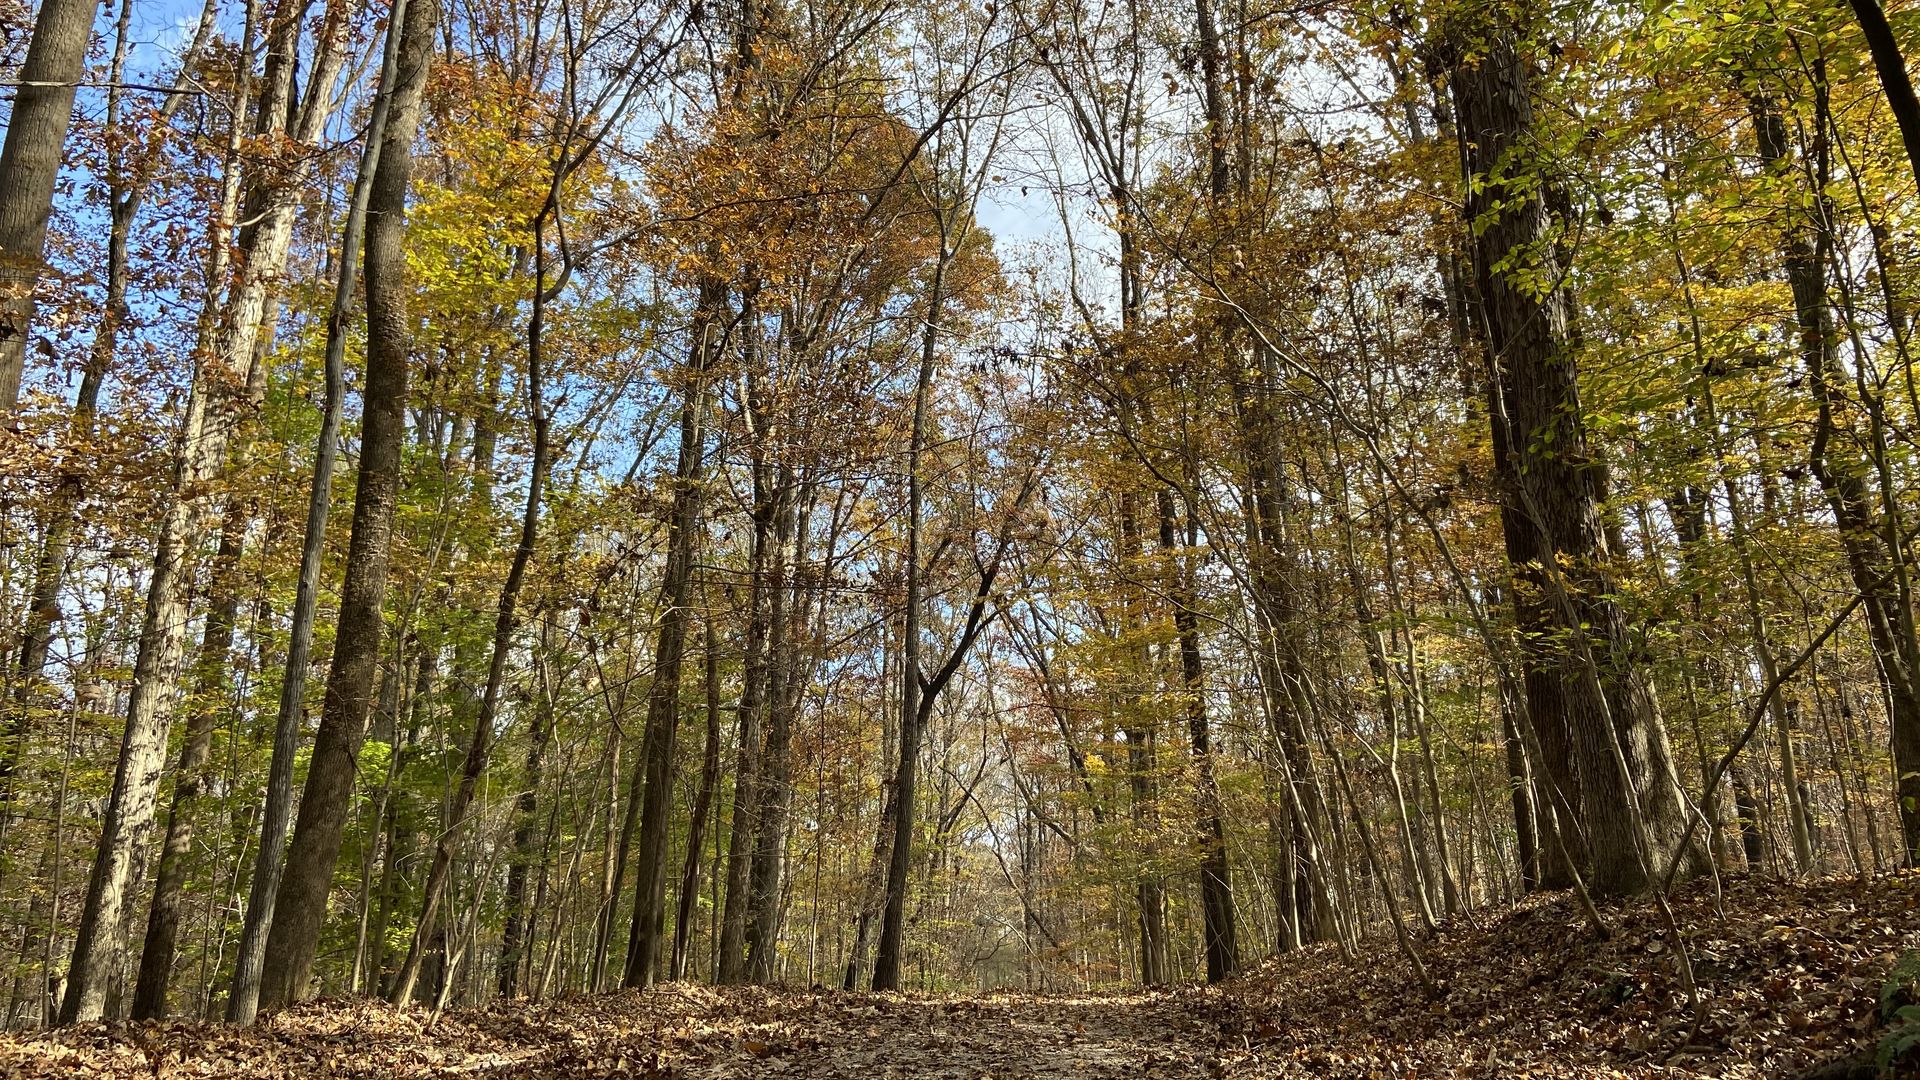 A wide trail shot close from the ground and looking up at a wooded forest during autumn